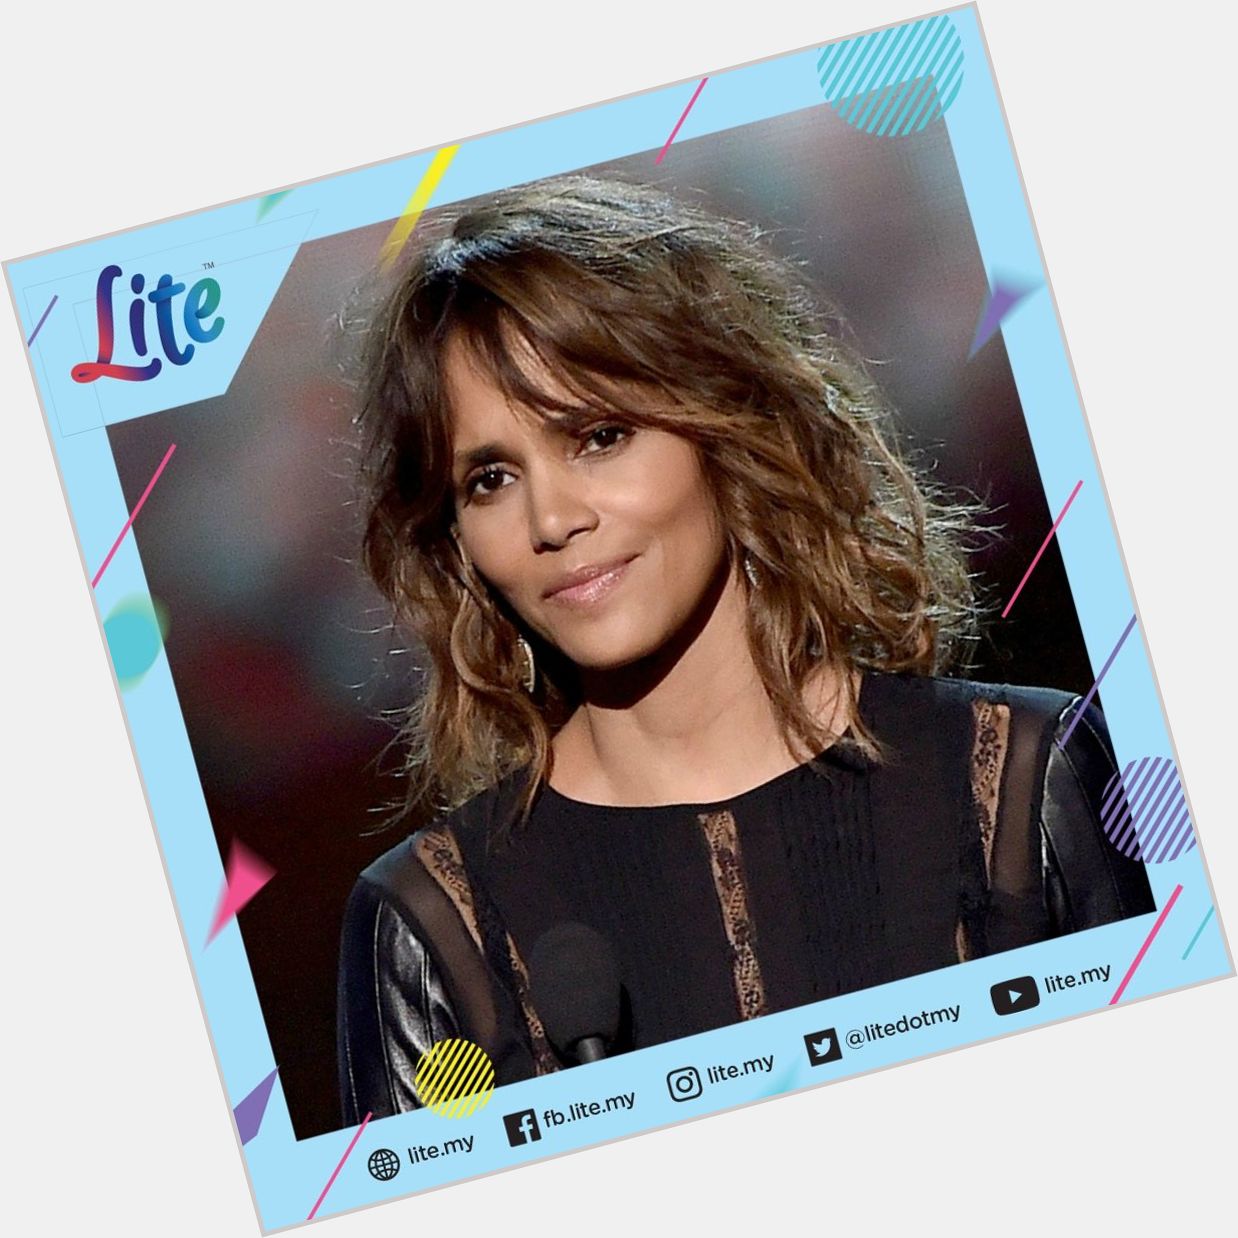 Happy birthday Halle Berry! The Academy Award winning actress turns 53 today. : Independent 